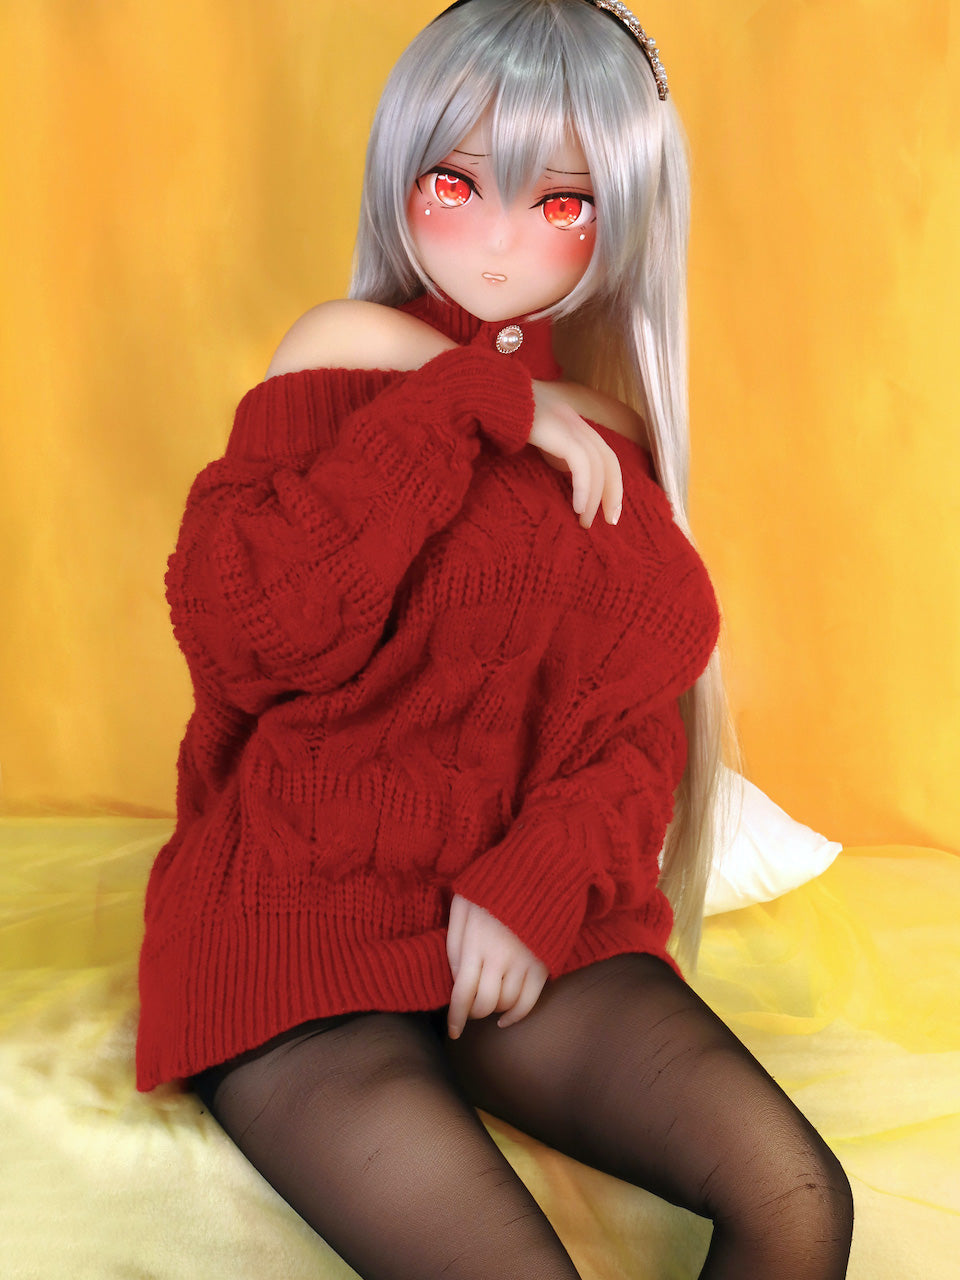 [AOTUME Doll] 155cm / Hcup - Anime Sex Doll, Red Sweater